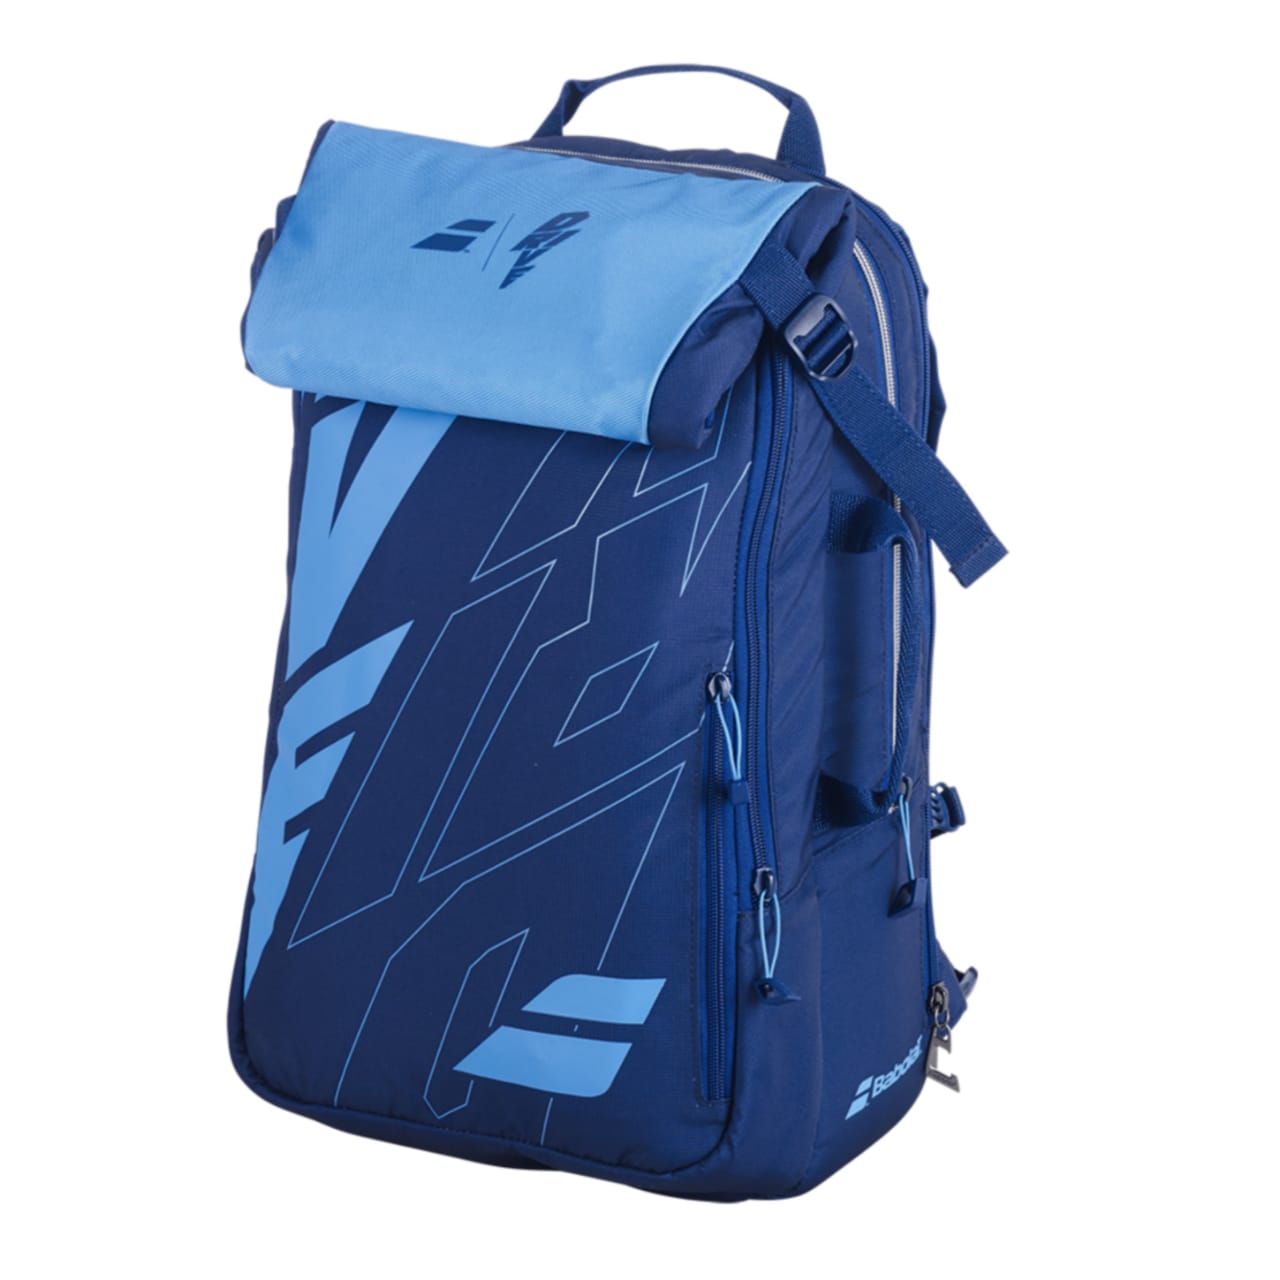 Backpack Babolat Pure Drive Blue 2021